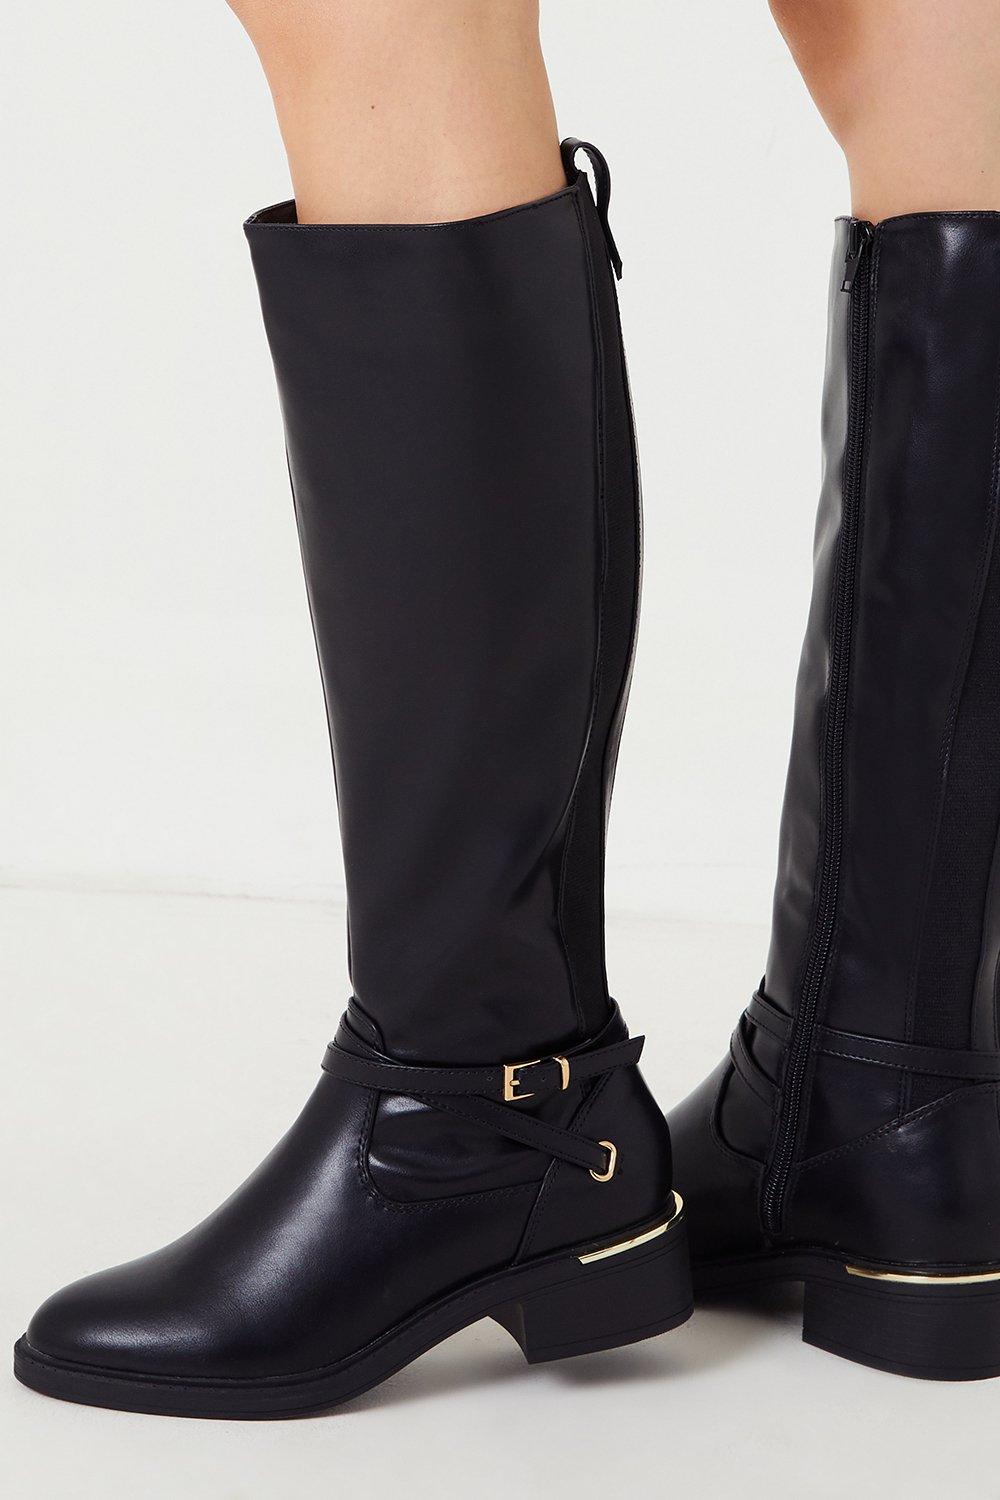 Boots | Hana Ankle Strap Detail Knee High Boots | Wallis